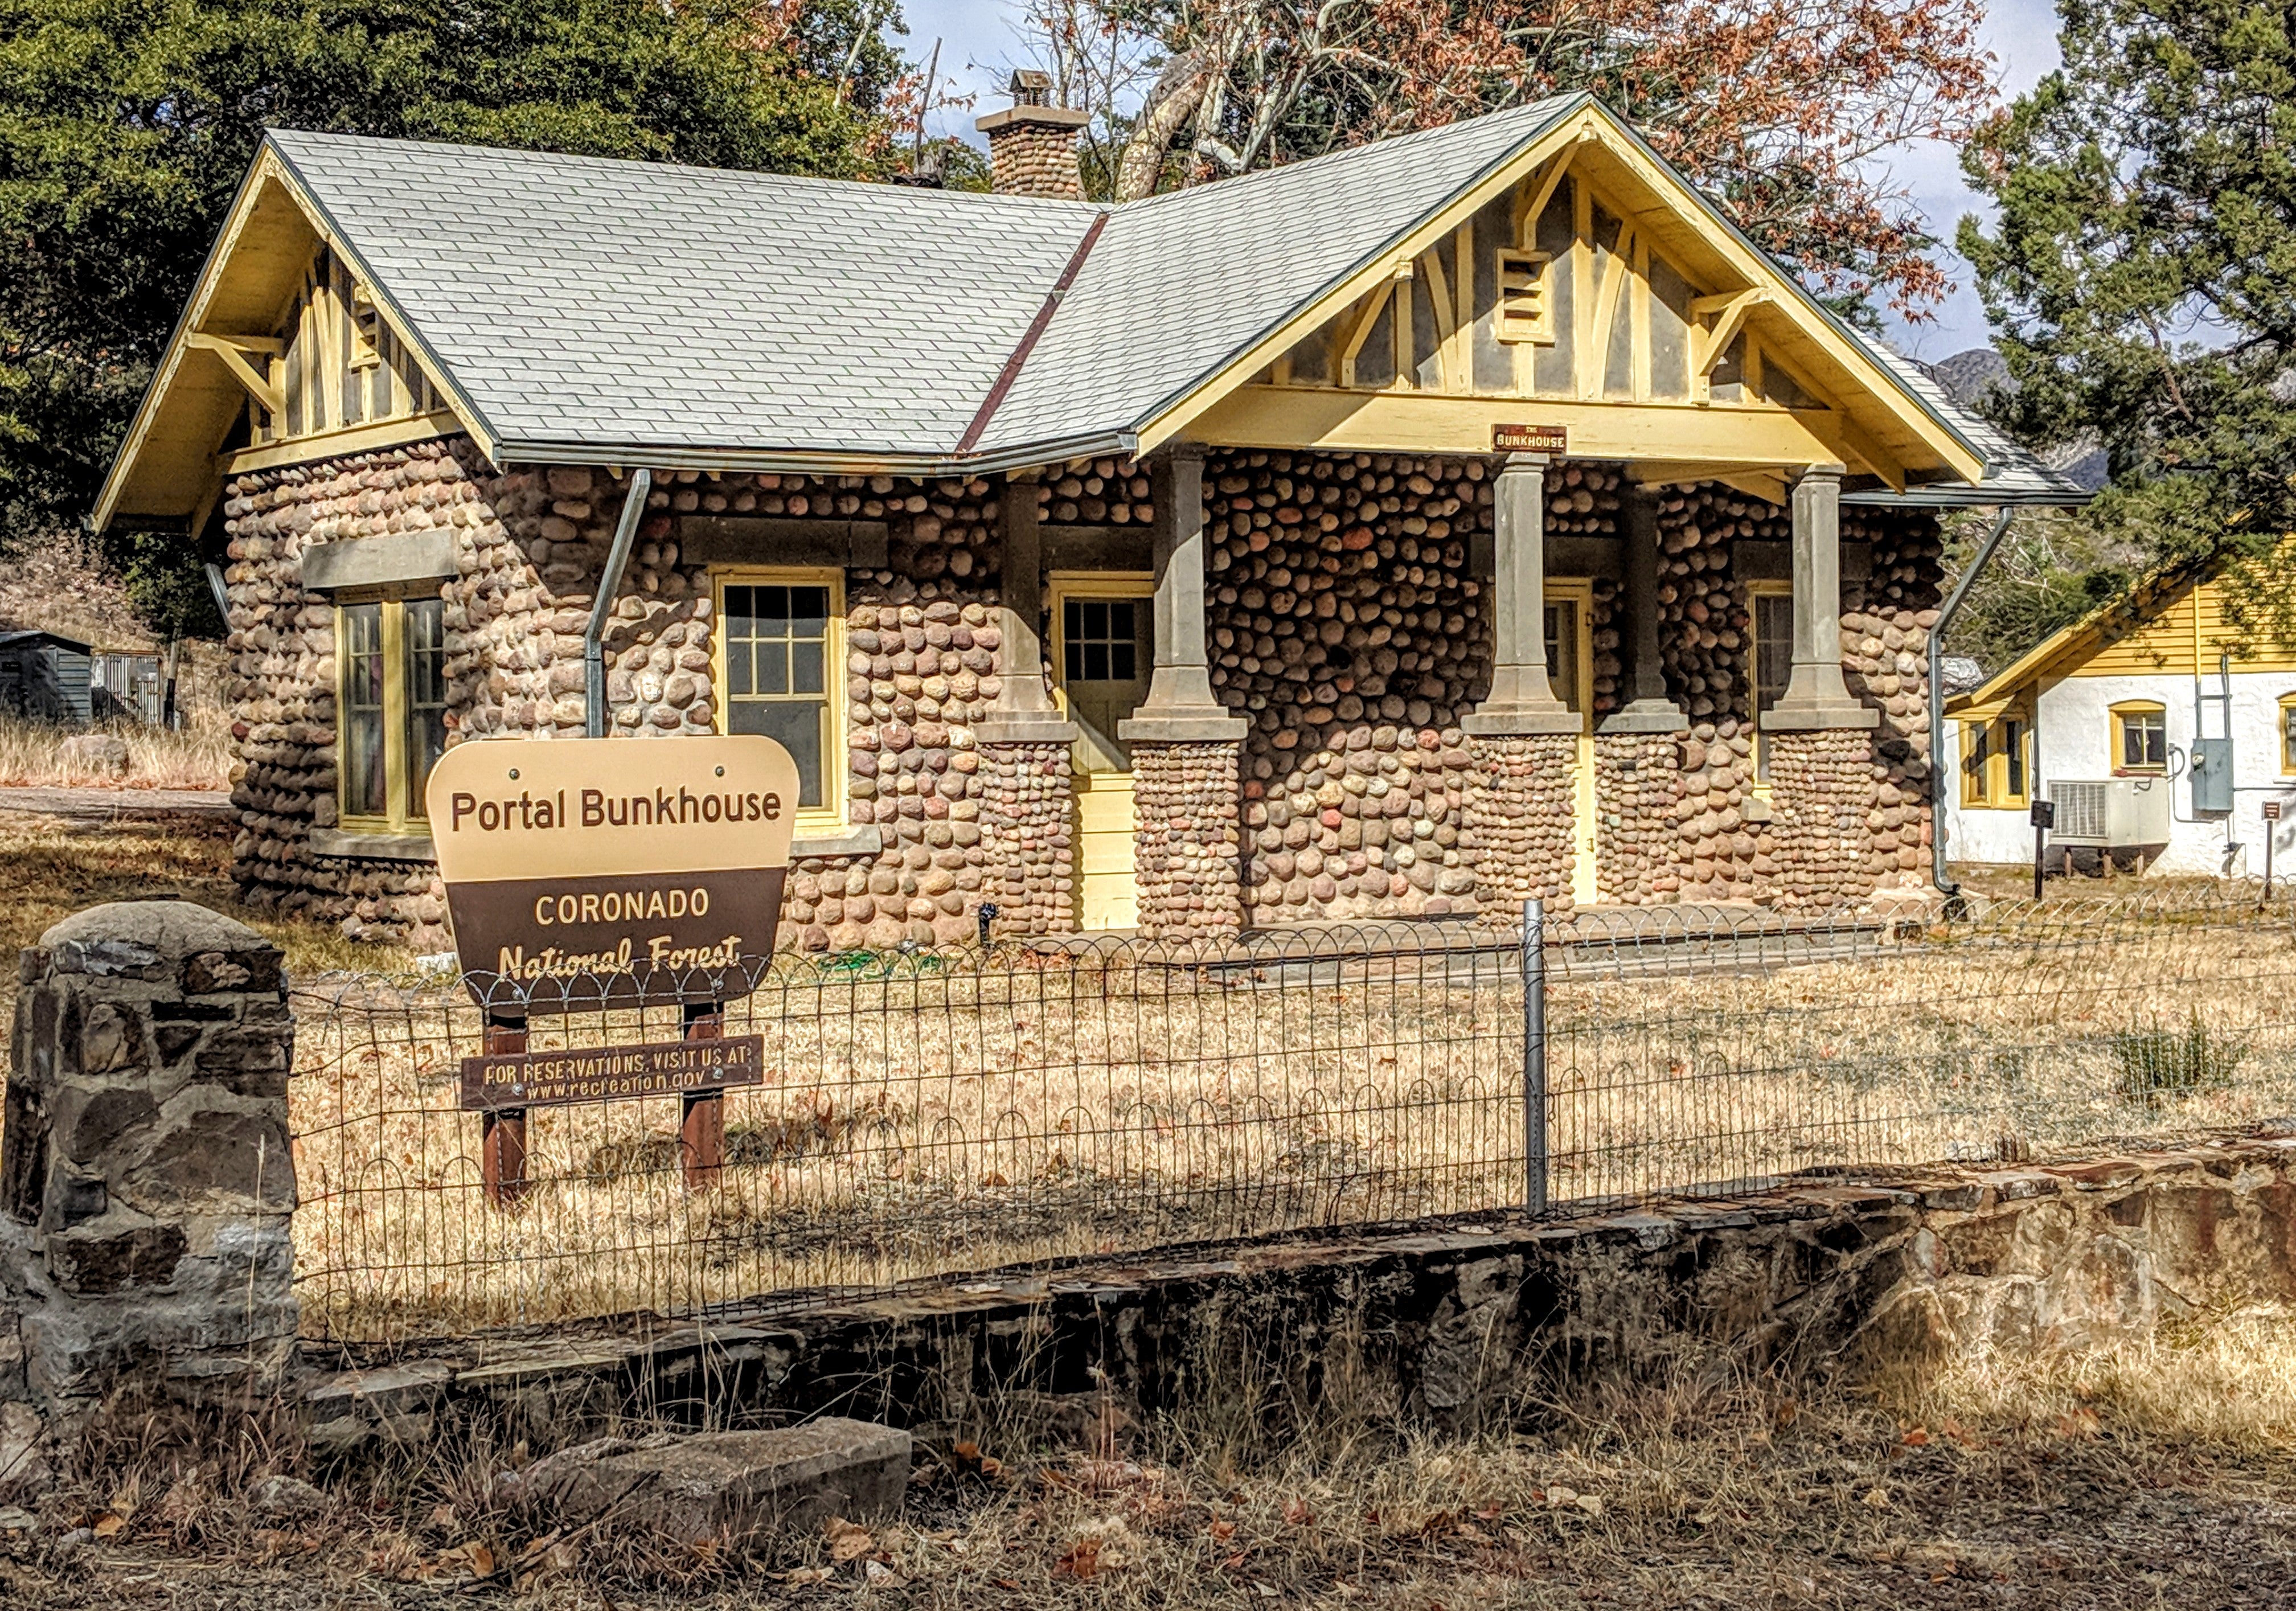 Bunkhouse is available for rent, right next to the Visitor's Center.